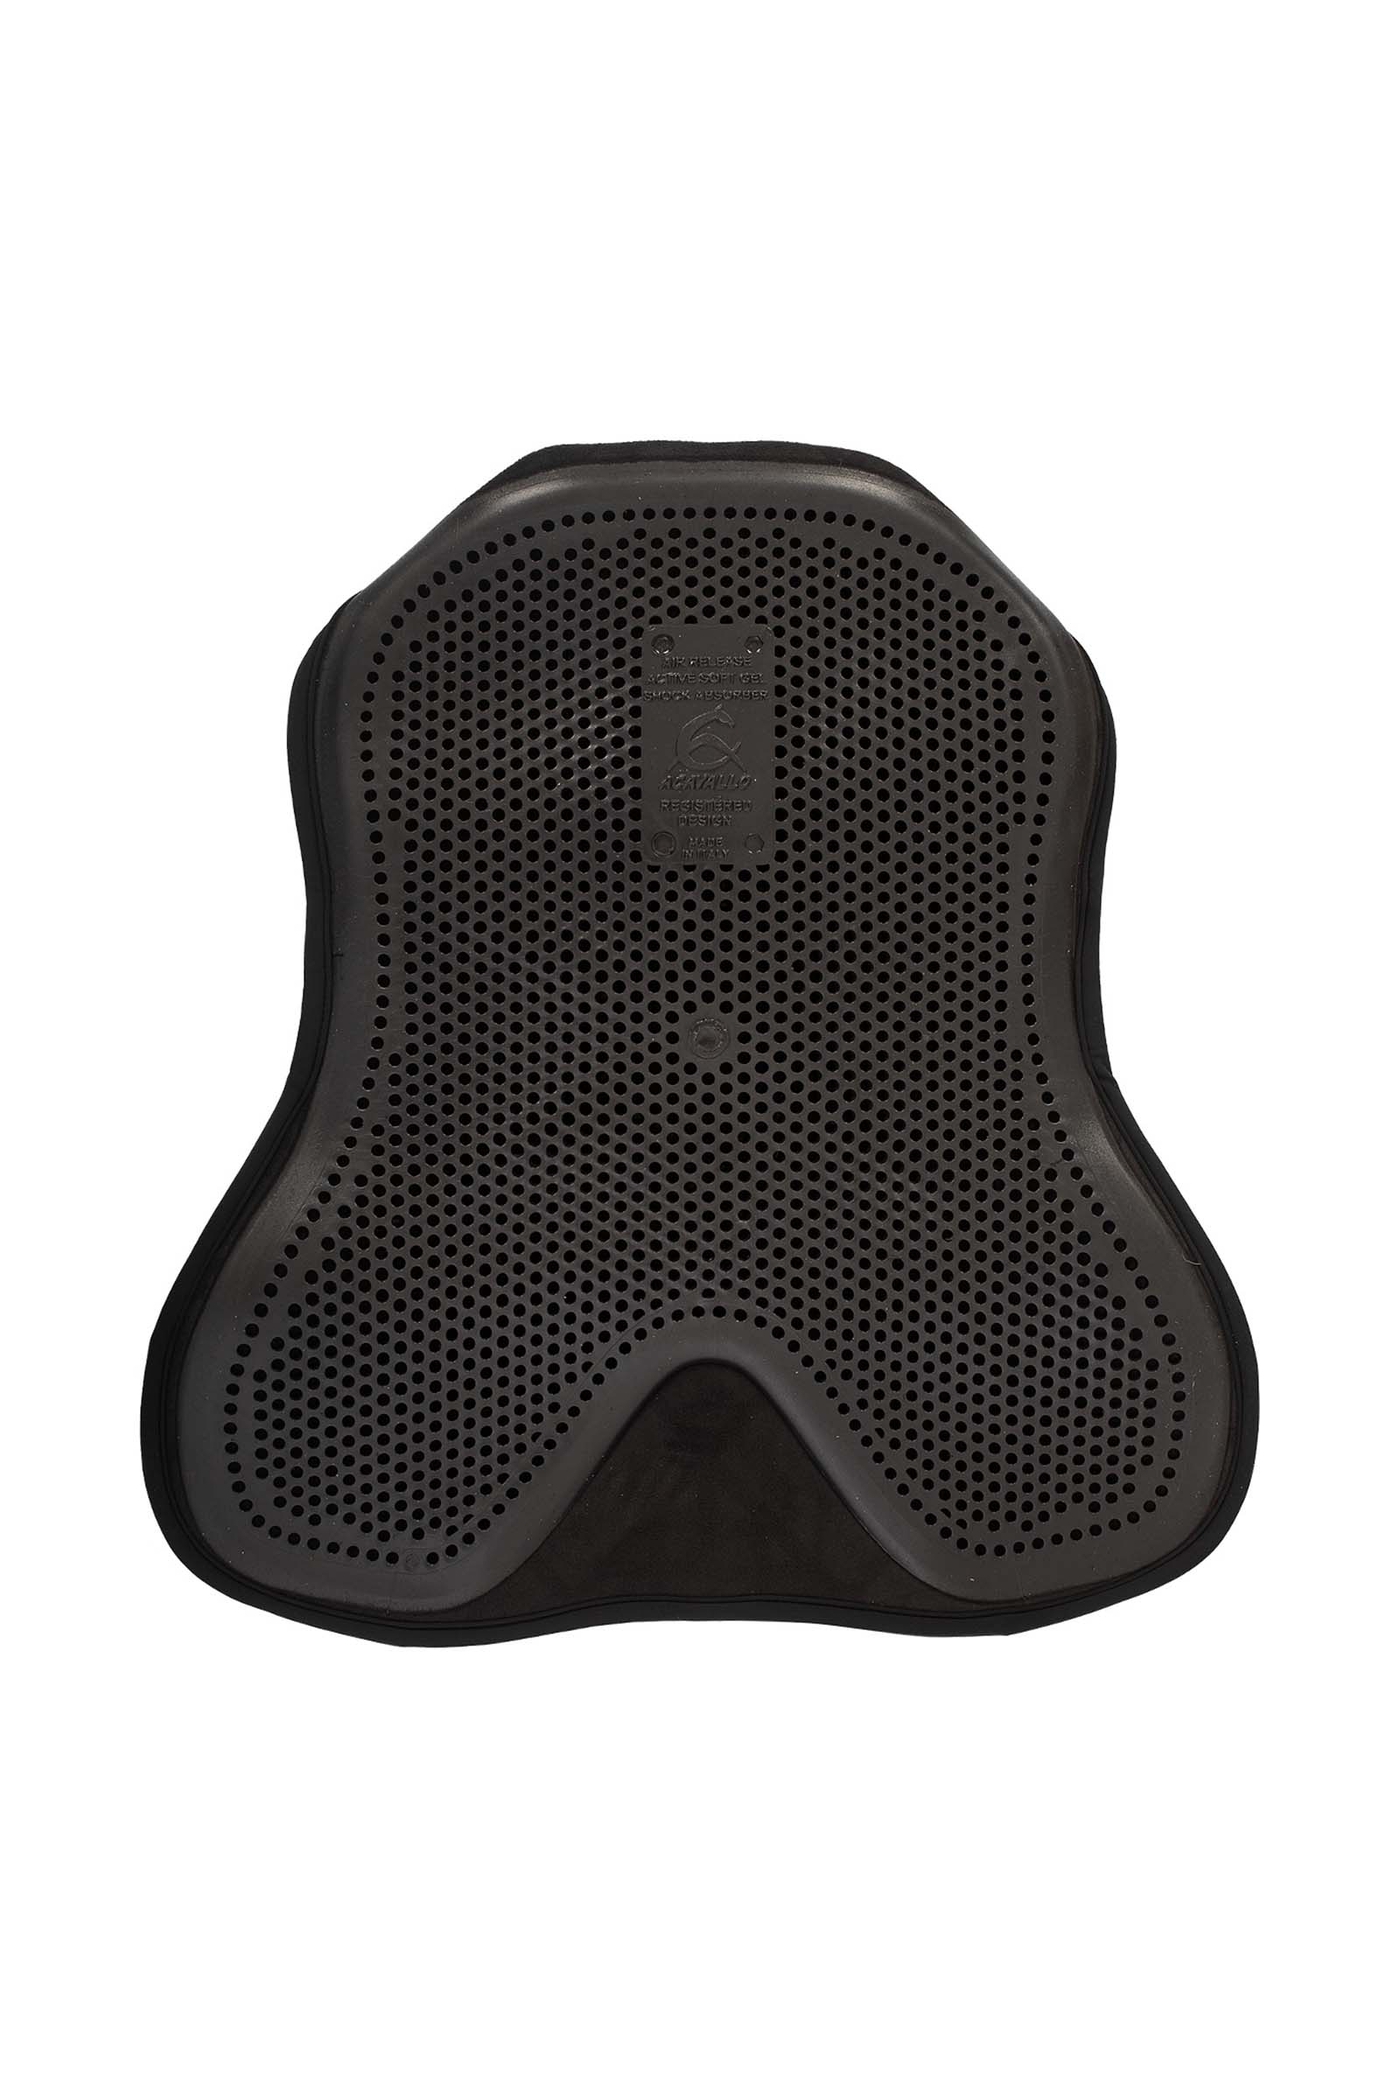 Acavallo Seat Protector Classic Gel 10 mm, for Dressage Saddle